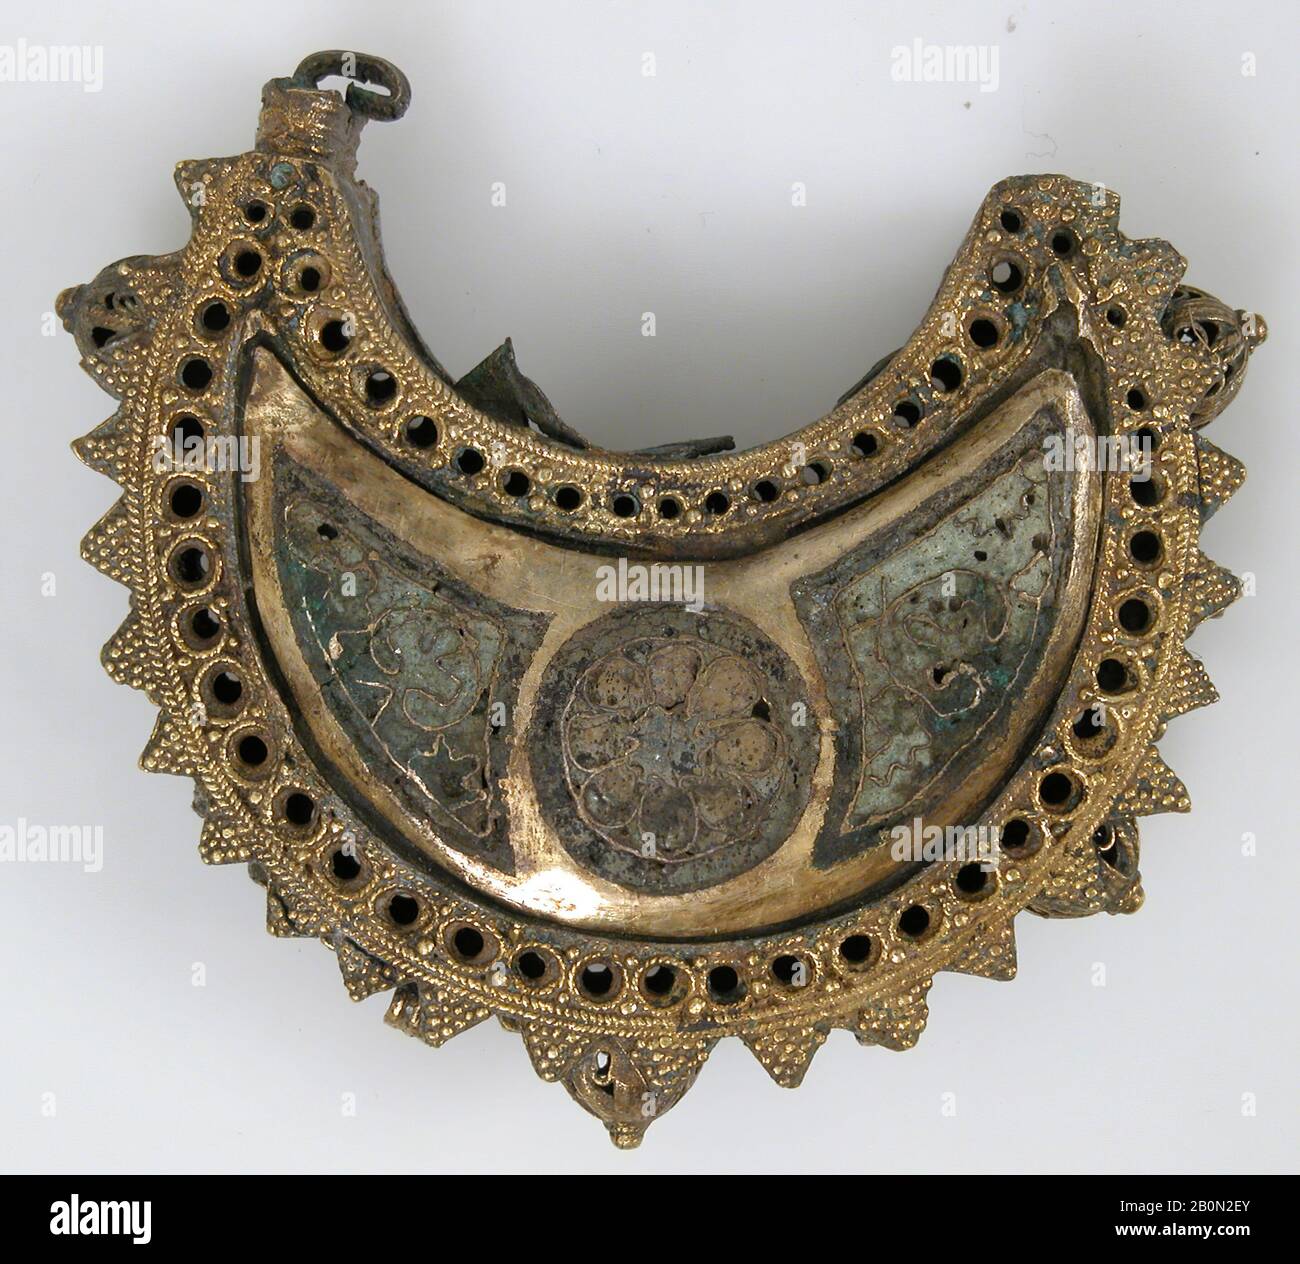 One of a Pair of Crescent-Shaped Earrings with Rosettes, Kievan Rus' or Byzantine, 12th century, Kievan Rus' or Byzantine, Cloisonné enamel, silver gilt, Overall: 2 1/16 x 2 5/16 x 1/2 in. (5.3 x 5.8 x 1.3 cm), Enamels-Cloisonné Stock Photo